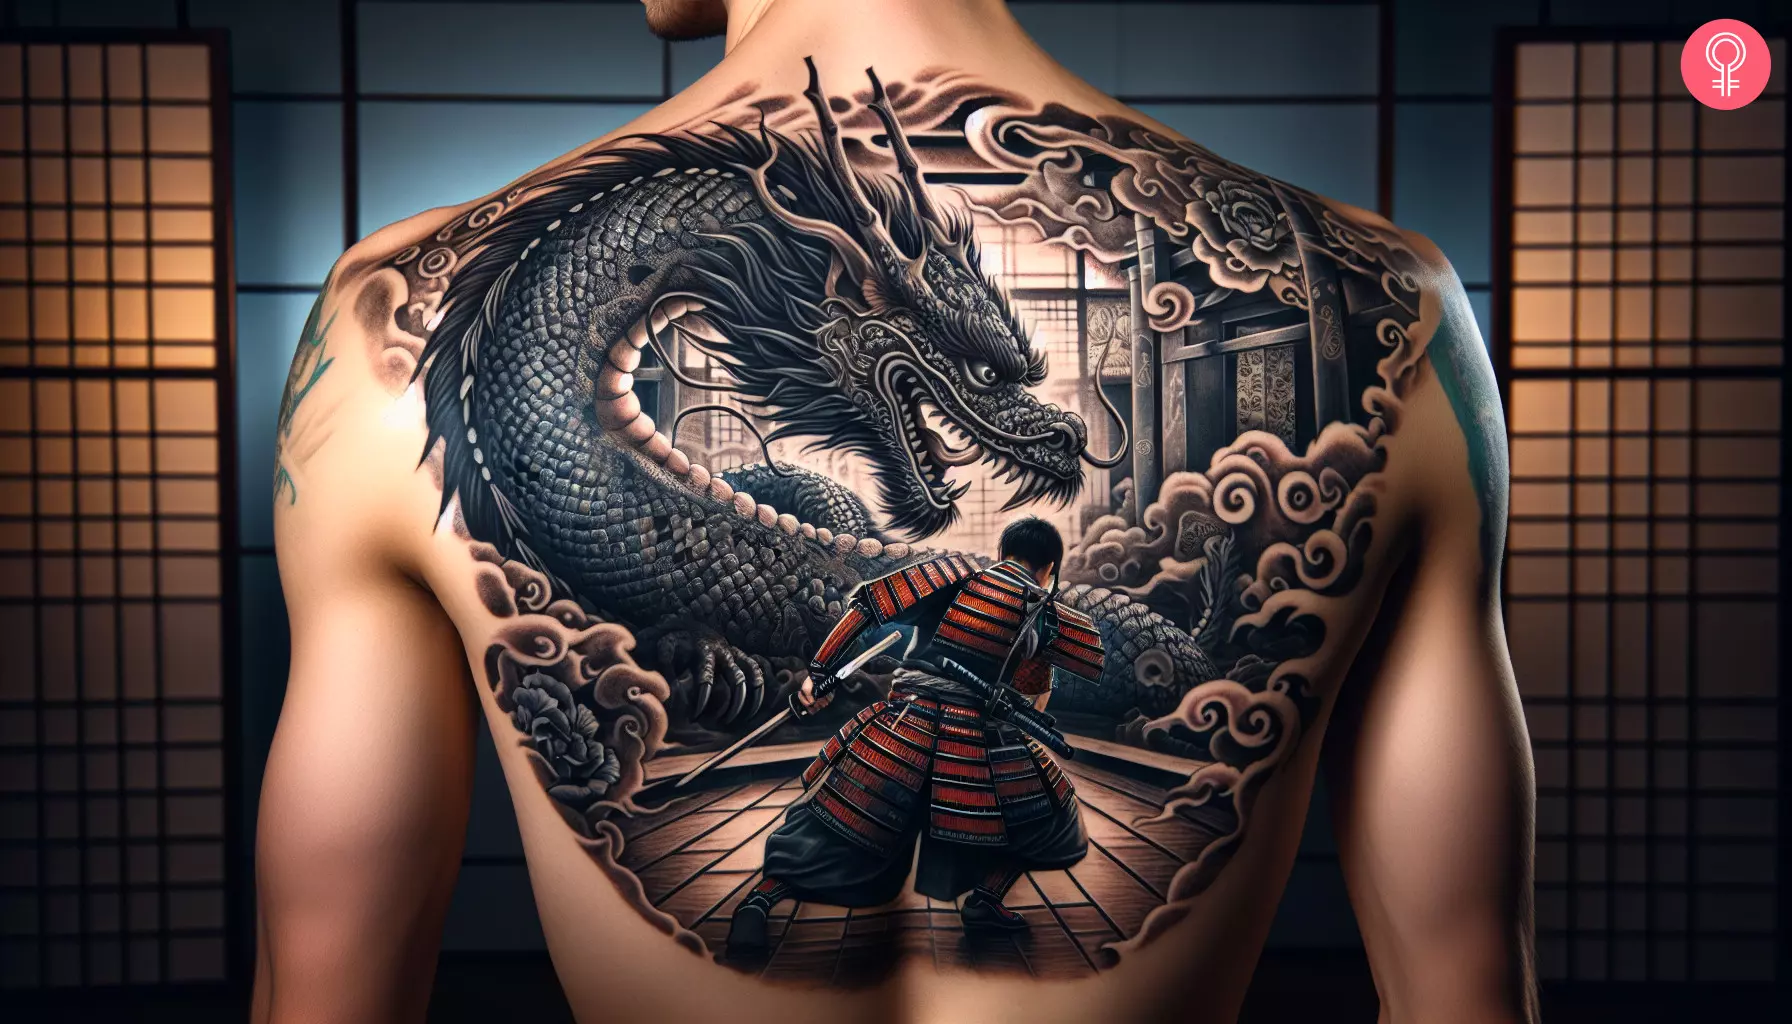 A dragon and samurai tattoo on the back